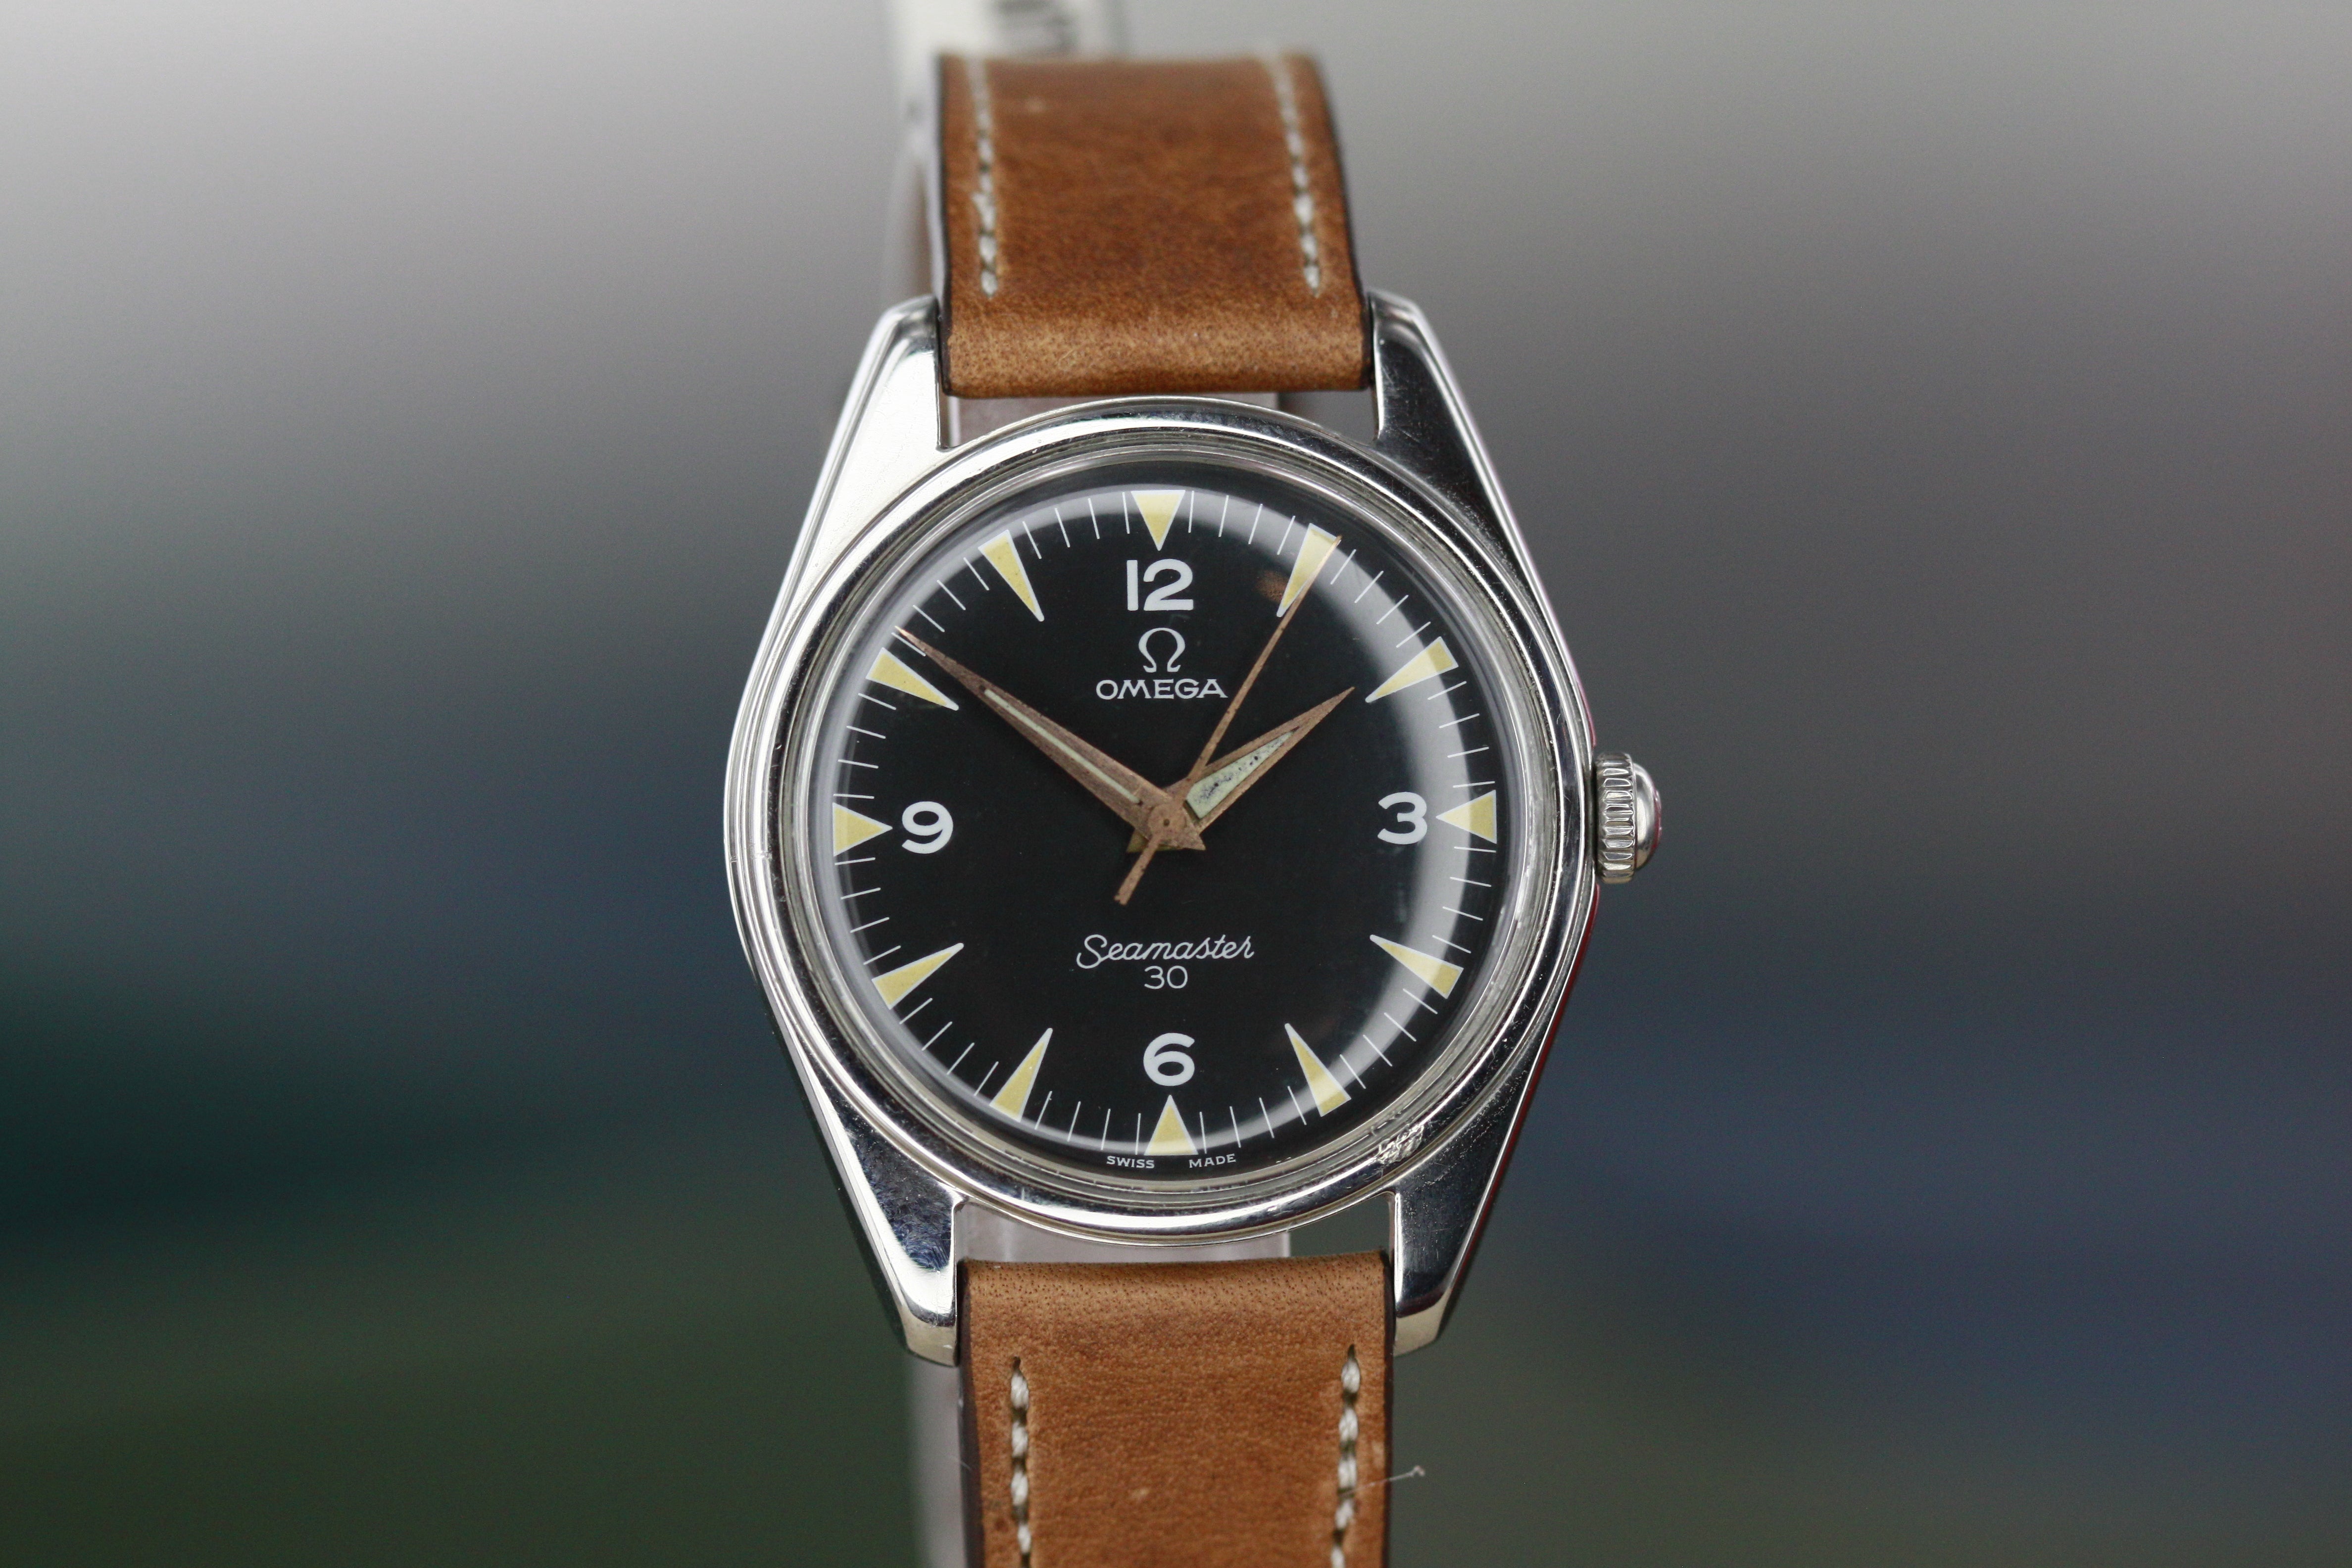 Omega Ranchero Ref.2296 Seamaster Black Radium Dial Military delivered to the Peruvian Air Force